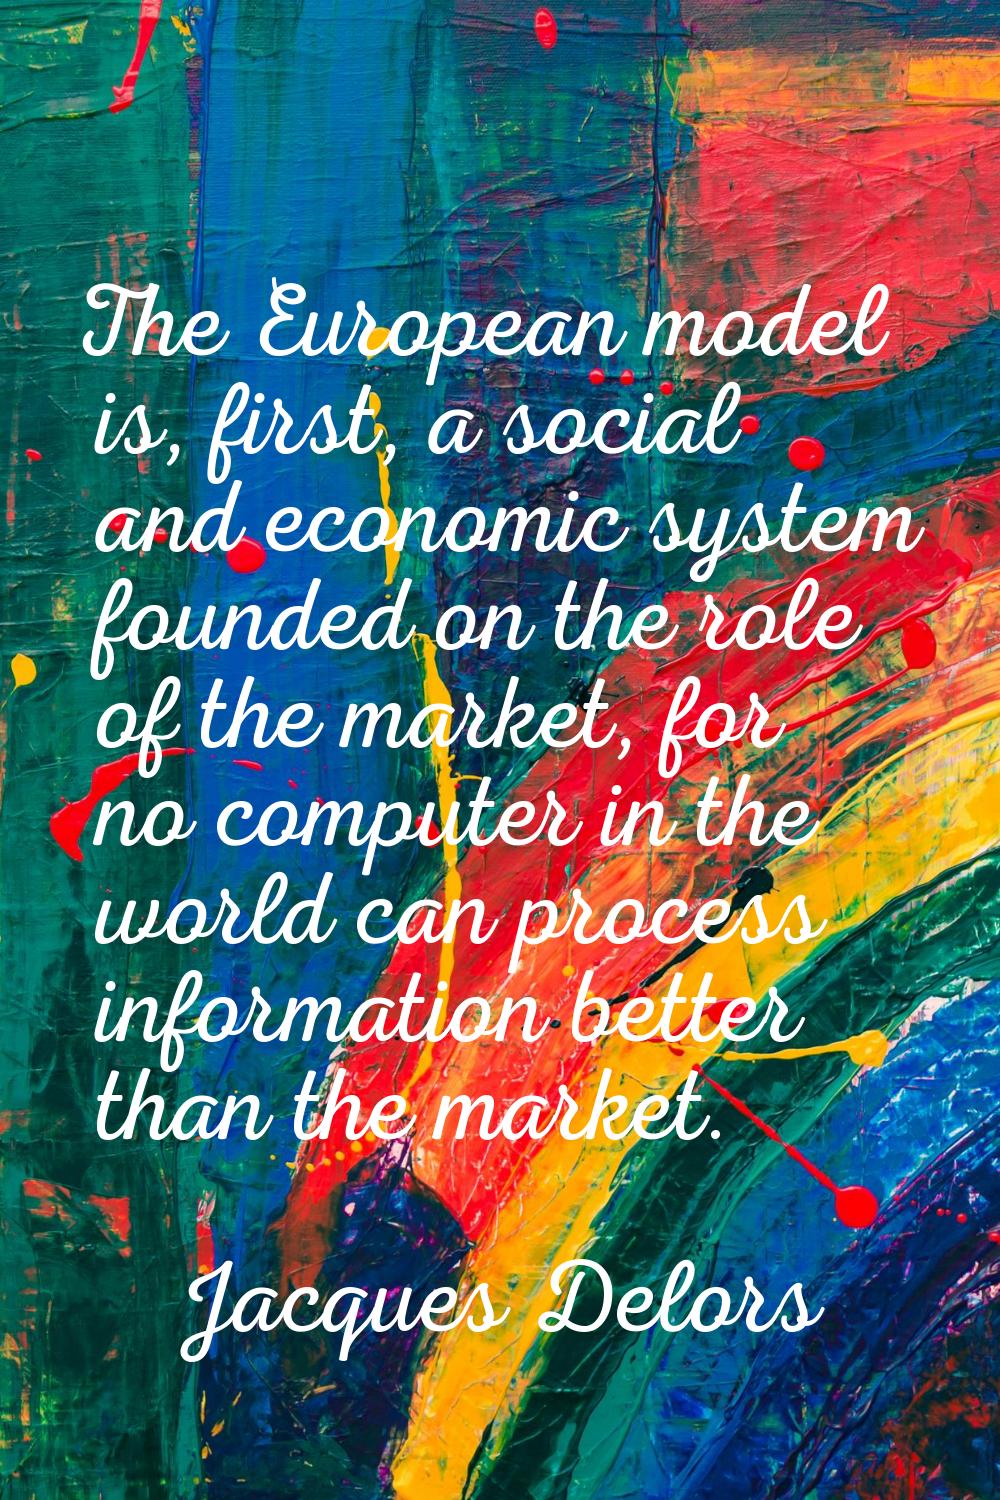 The European model is, first, a social and economic system founded on the role of the market, for n